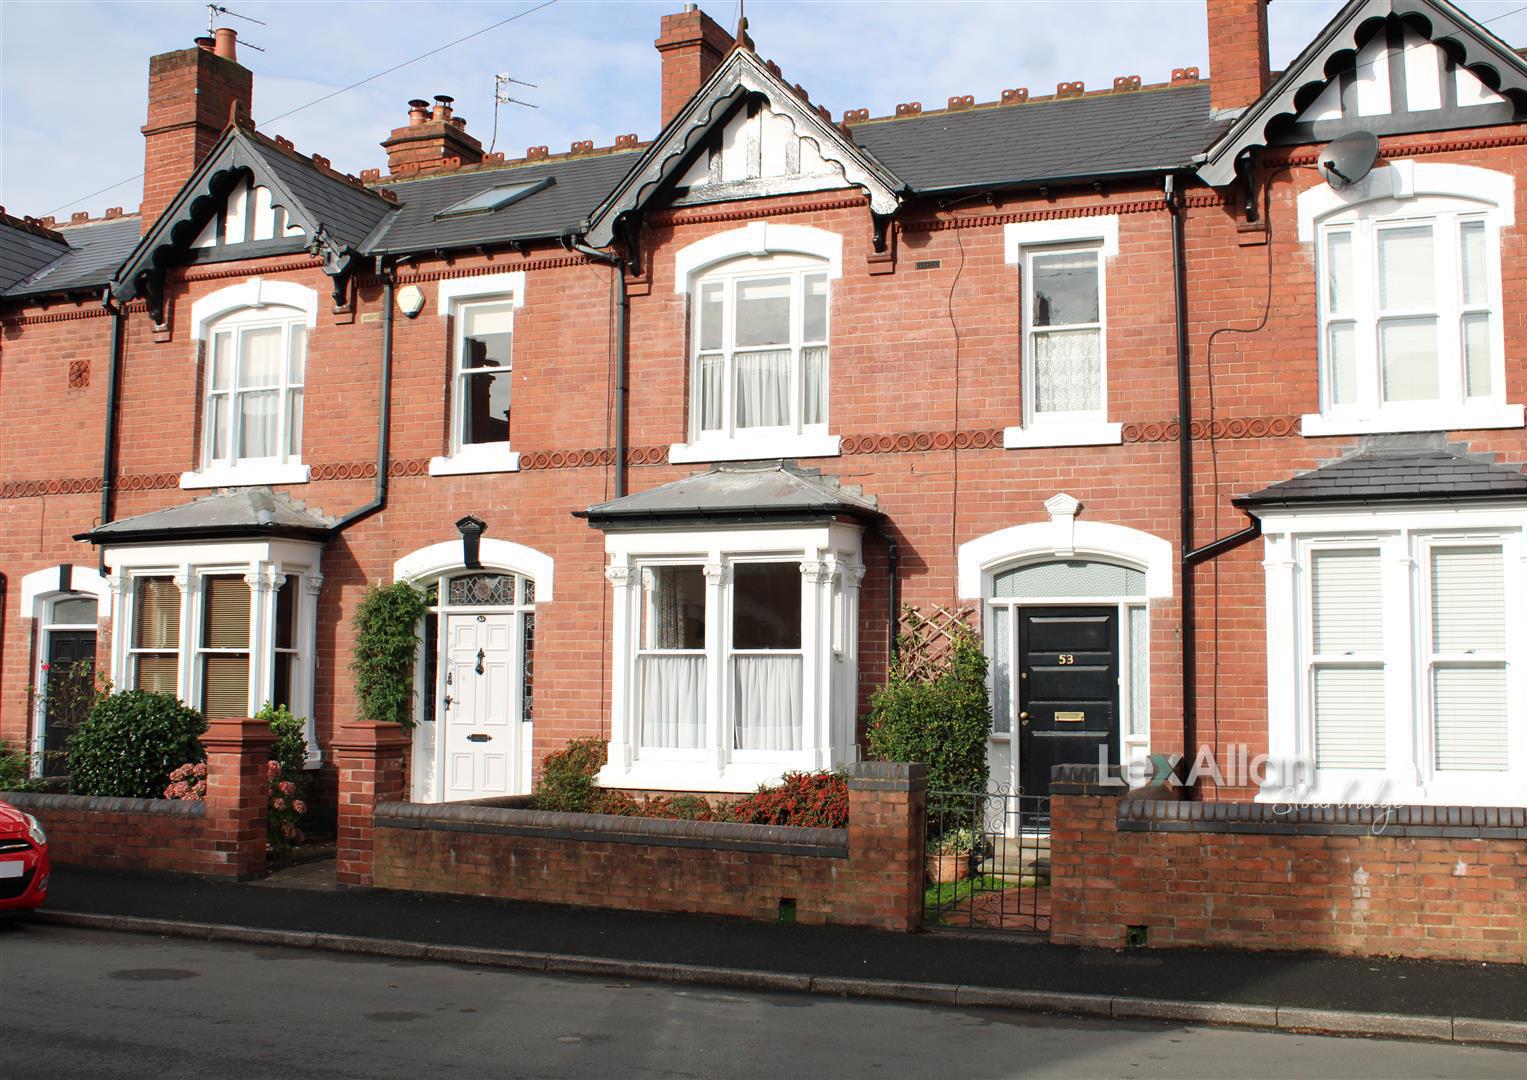 3 bed house for sale in Clifton Street, Stourbridge - Property Image 1